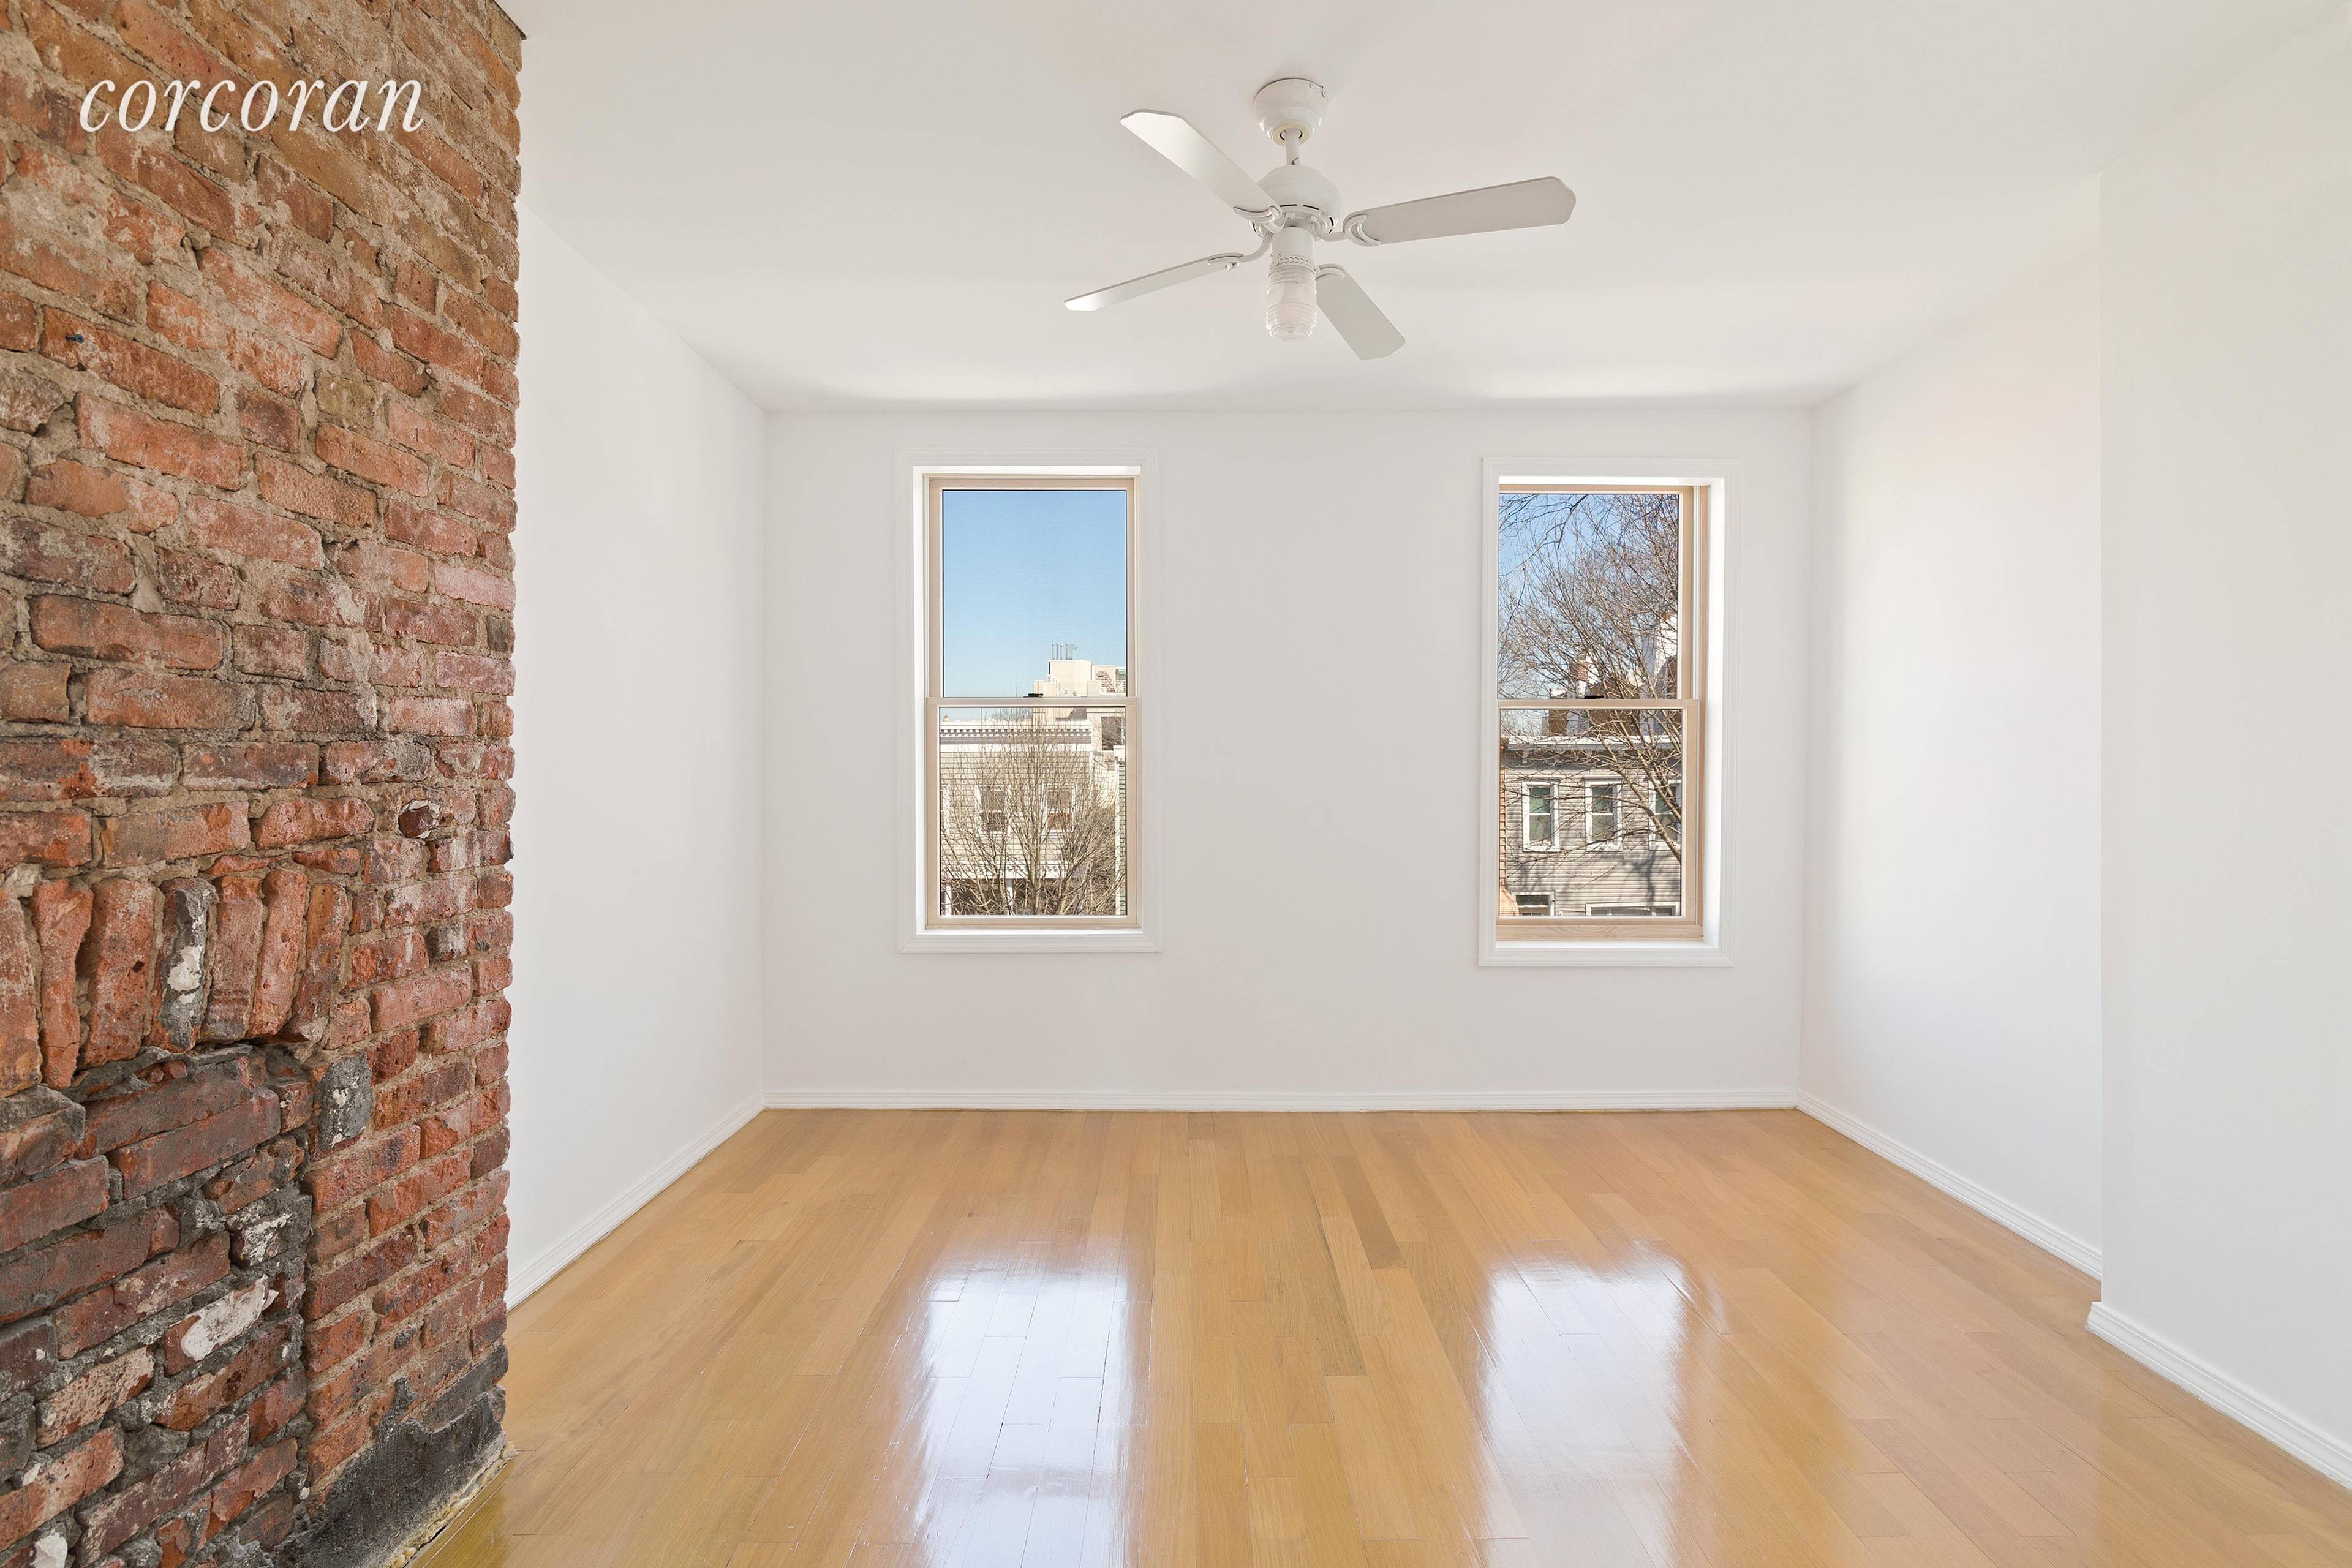 This charming turn of the century framed townhouse is located on a beautiful tree lined street in Park slope, just a few blocks away from Prospect Park.